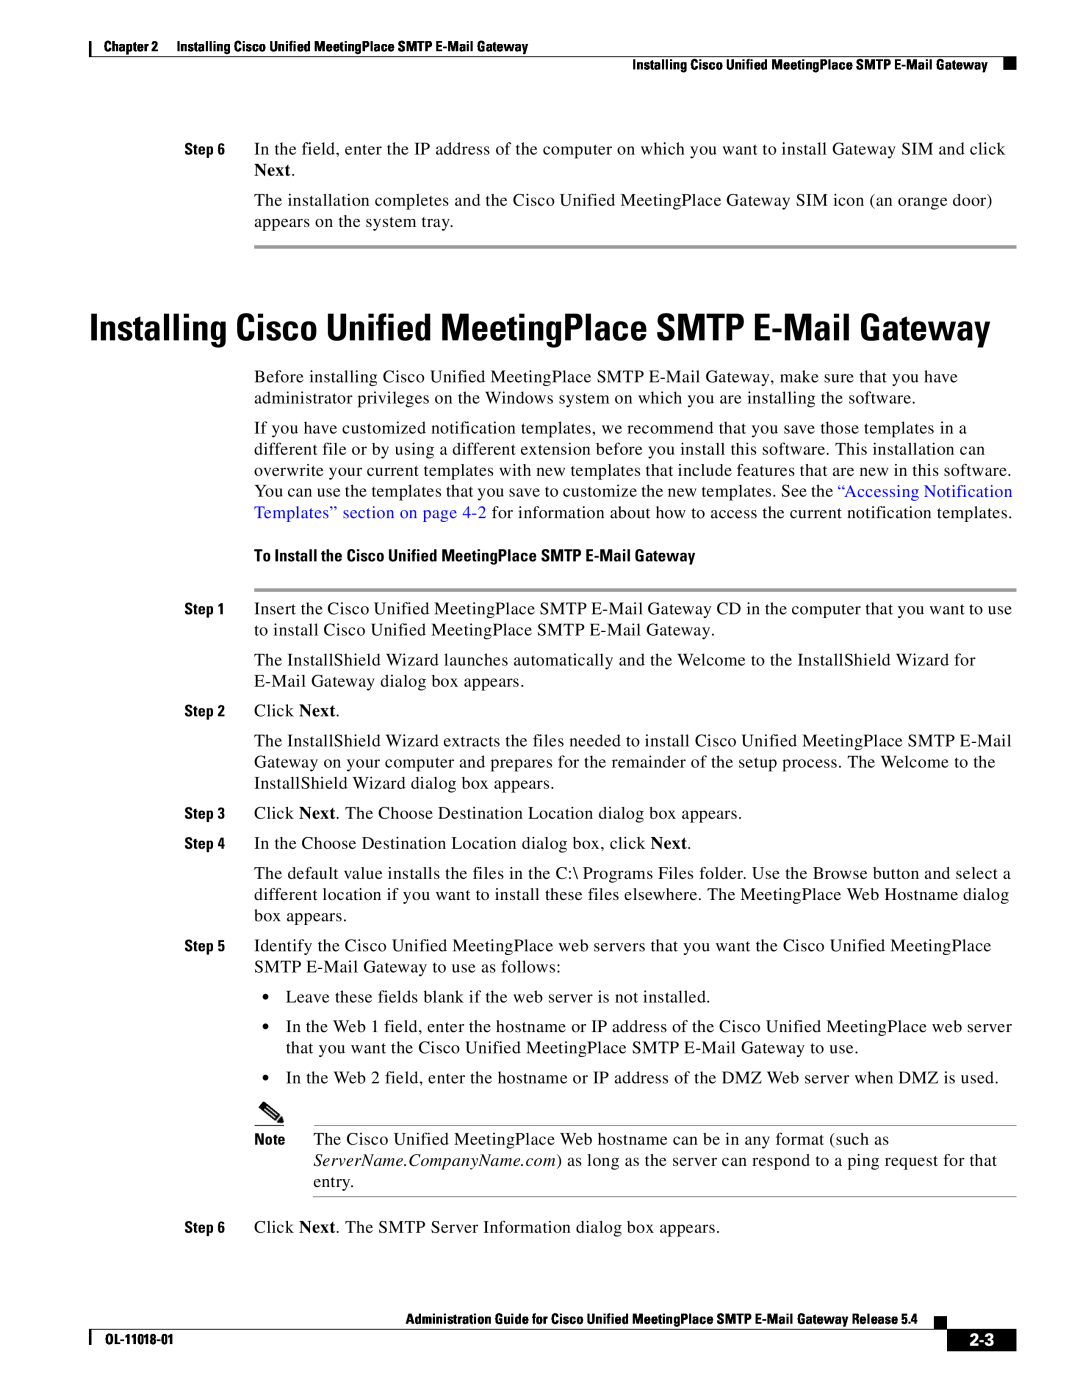 Cisco Systems manual Installing Cisco Unified MeetingPlace SMTP E-Mail Gateway 